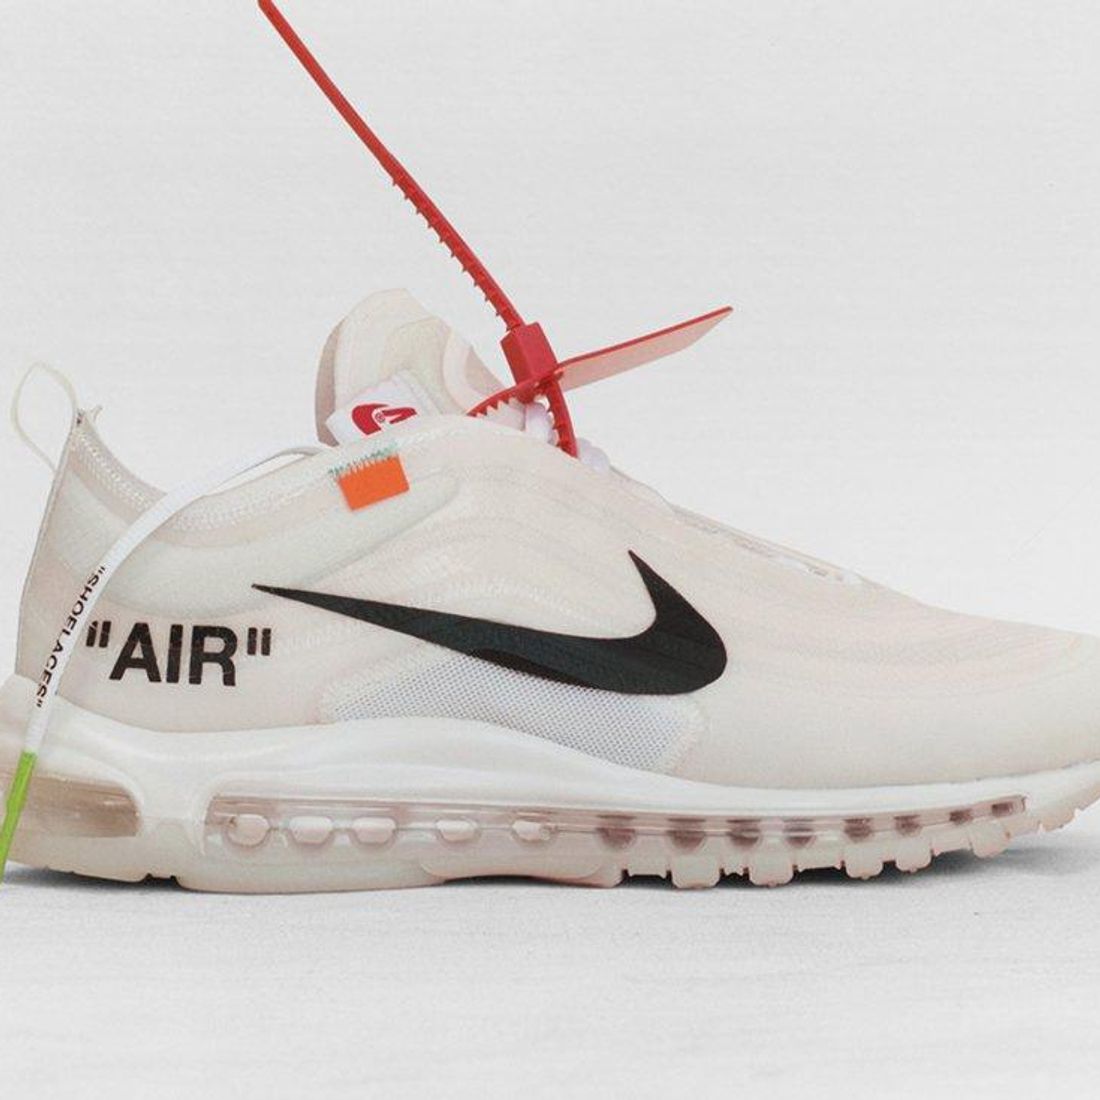 Nike Officially Unveils The Ten OFF-WHITE Virgil Abloh Collab